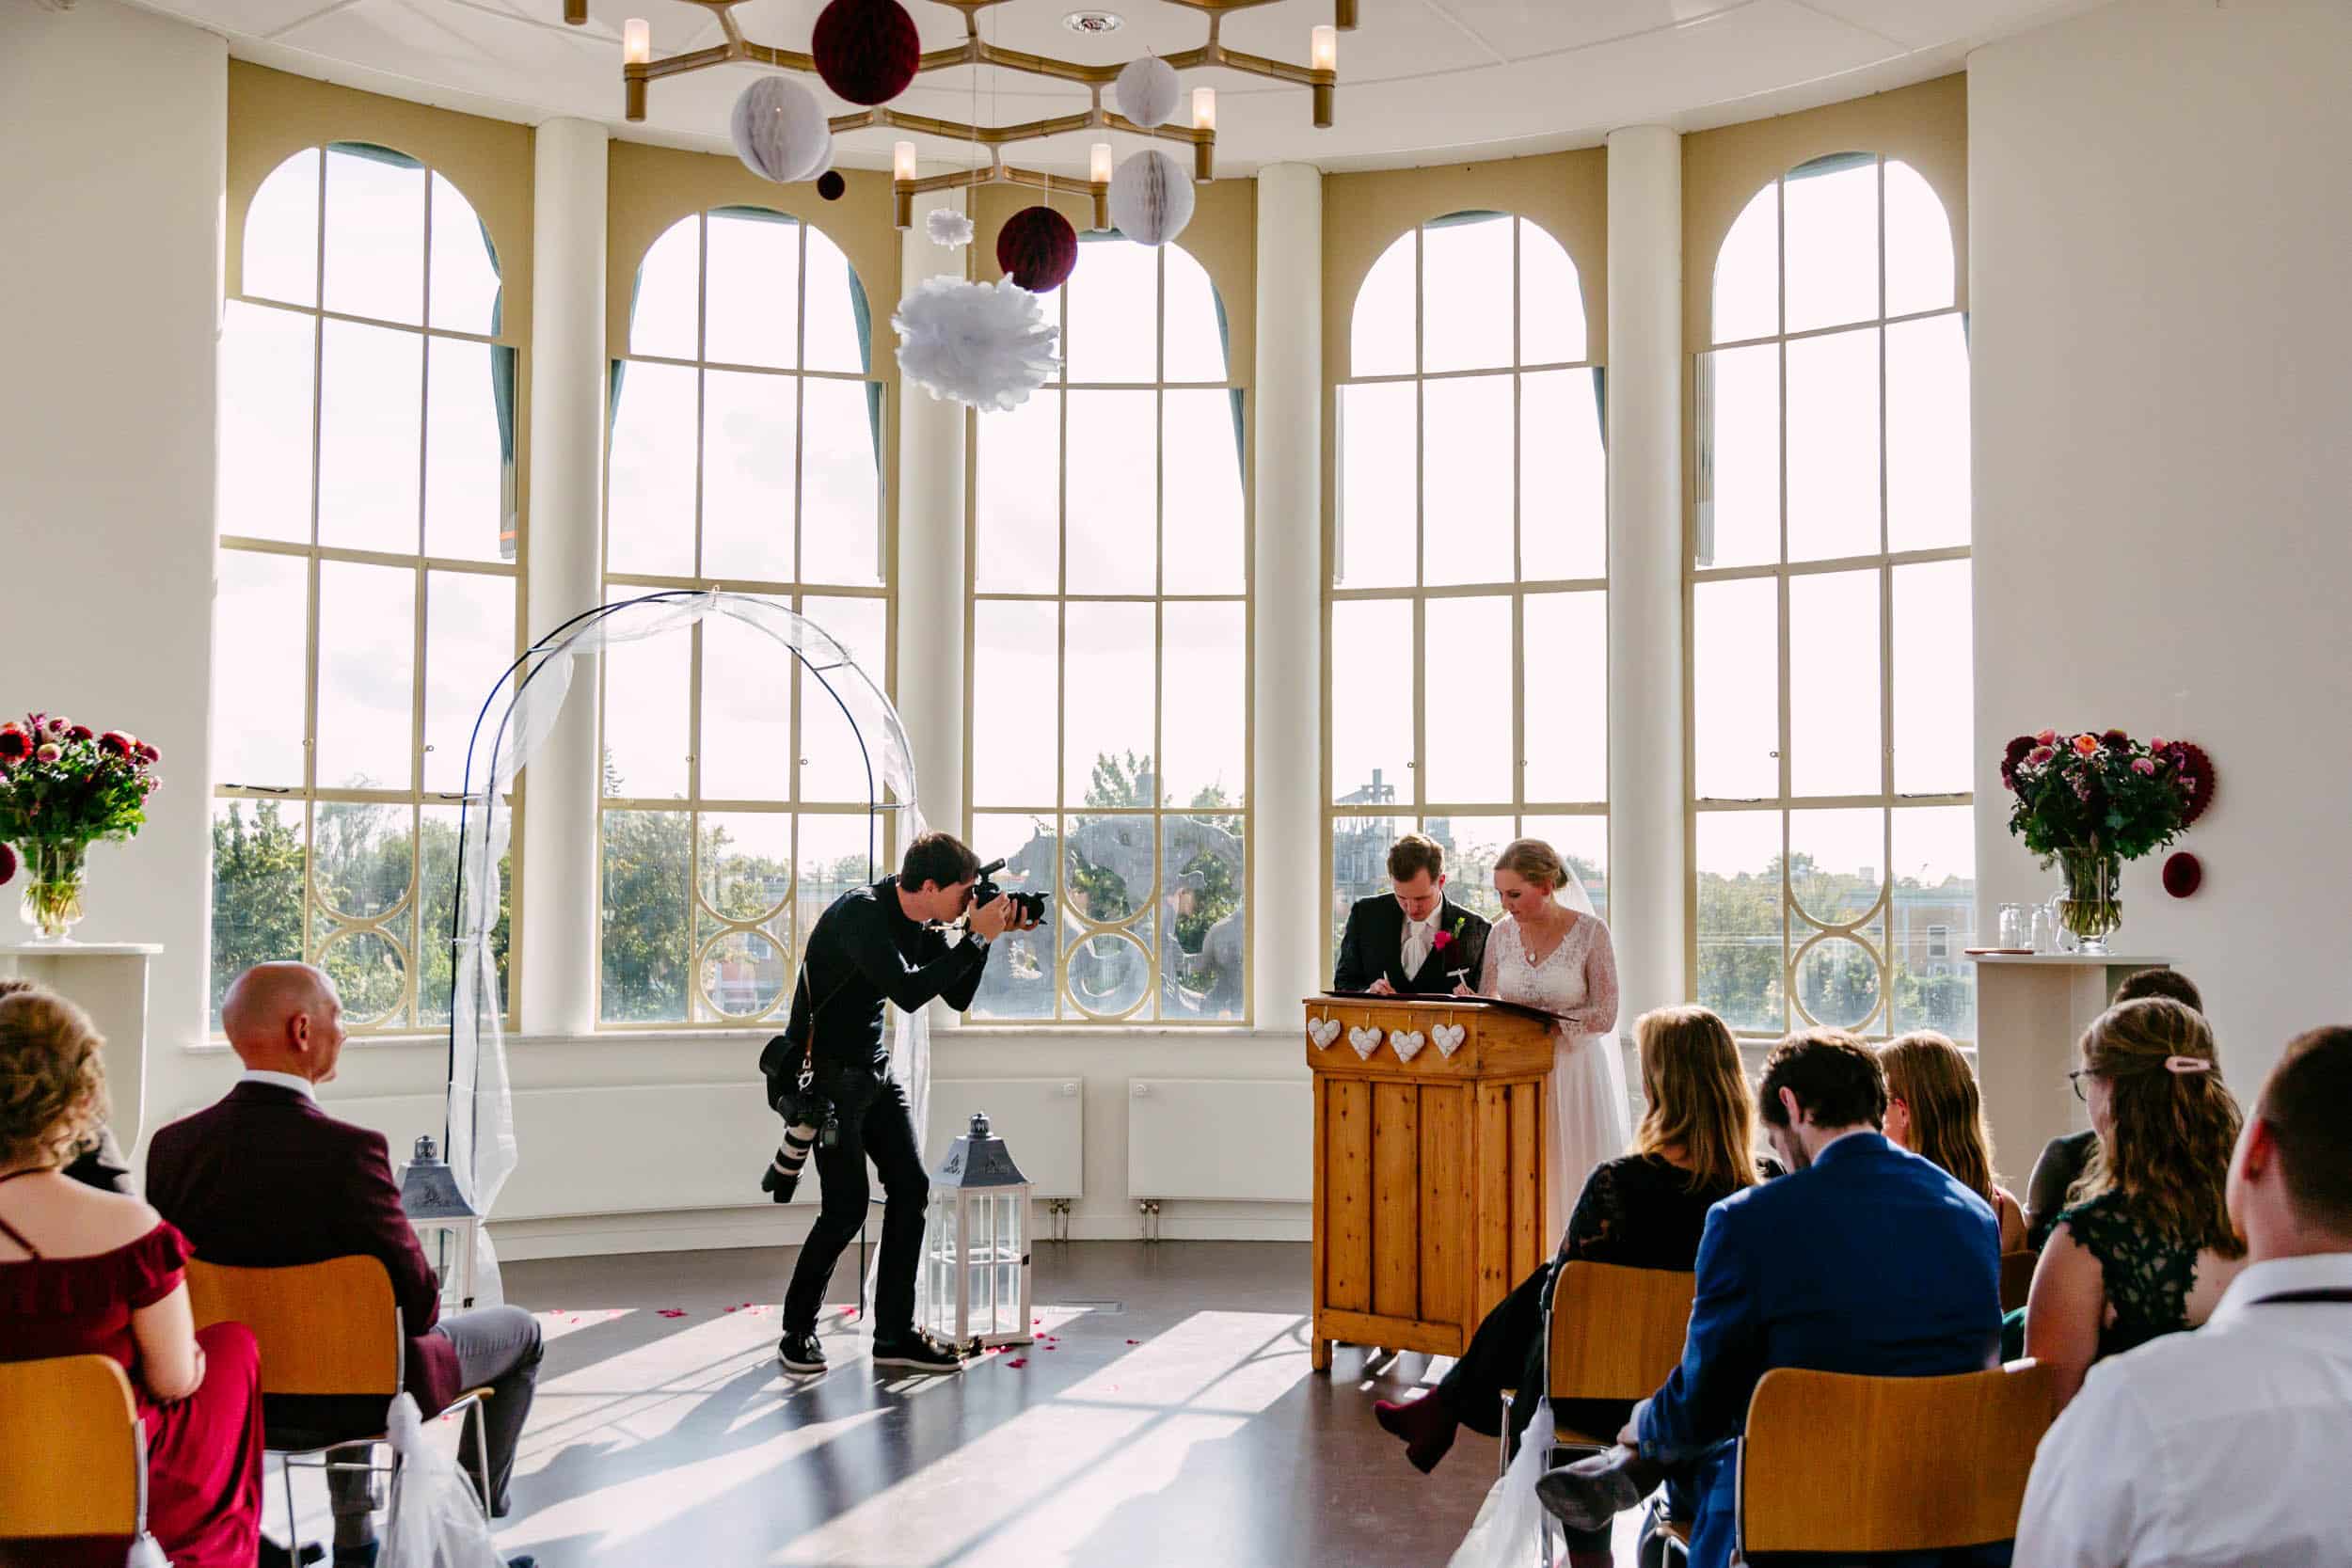 A wedding ceremony in a room with large windows, provided with Marriages.